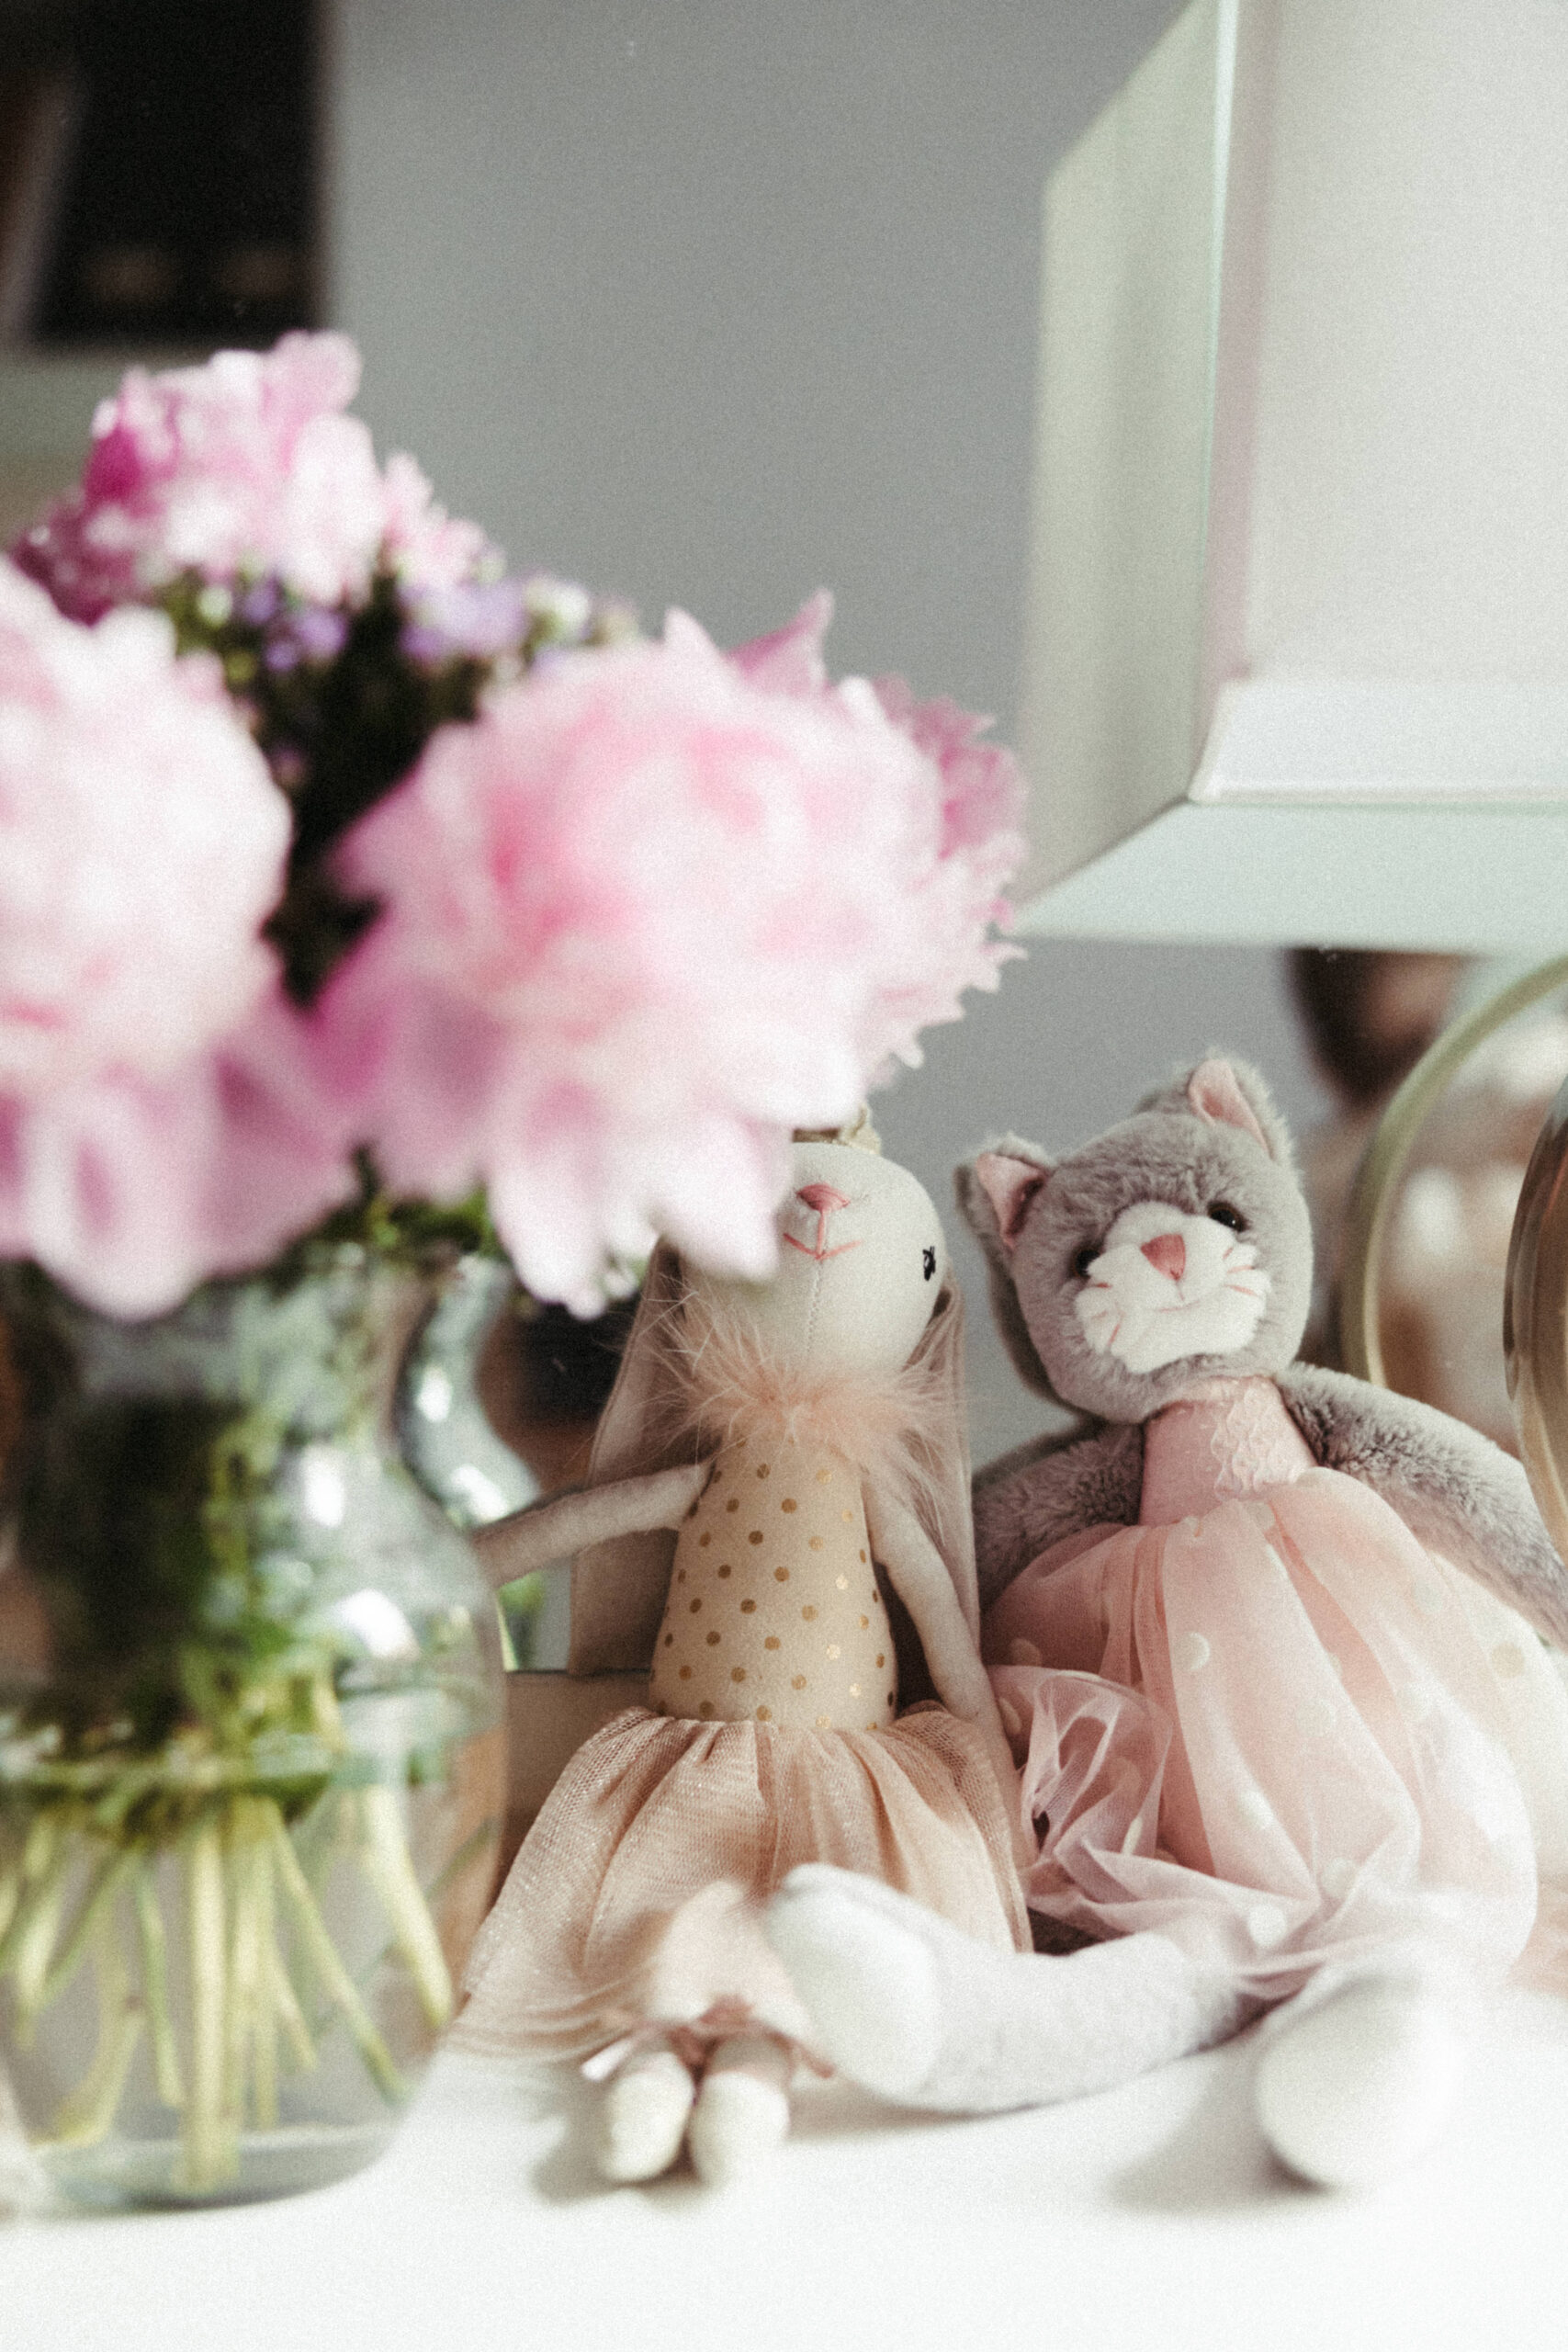 Pink flowers sit with a baby girls teddy bear and rabbit on her nightstand during a candid in home family photo shoot